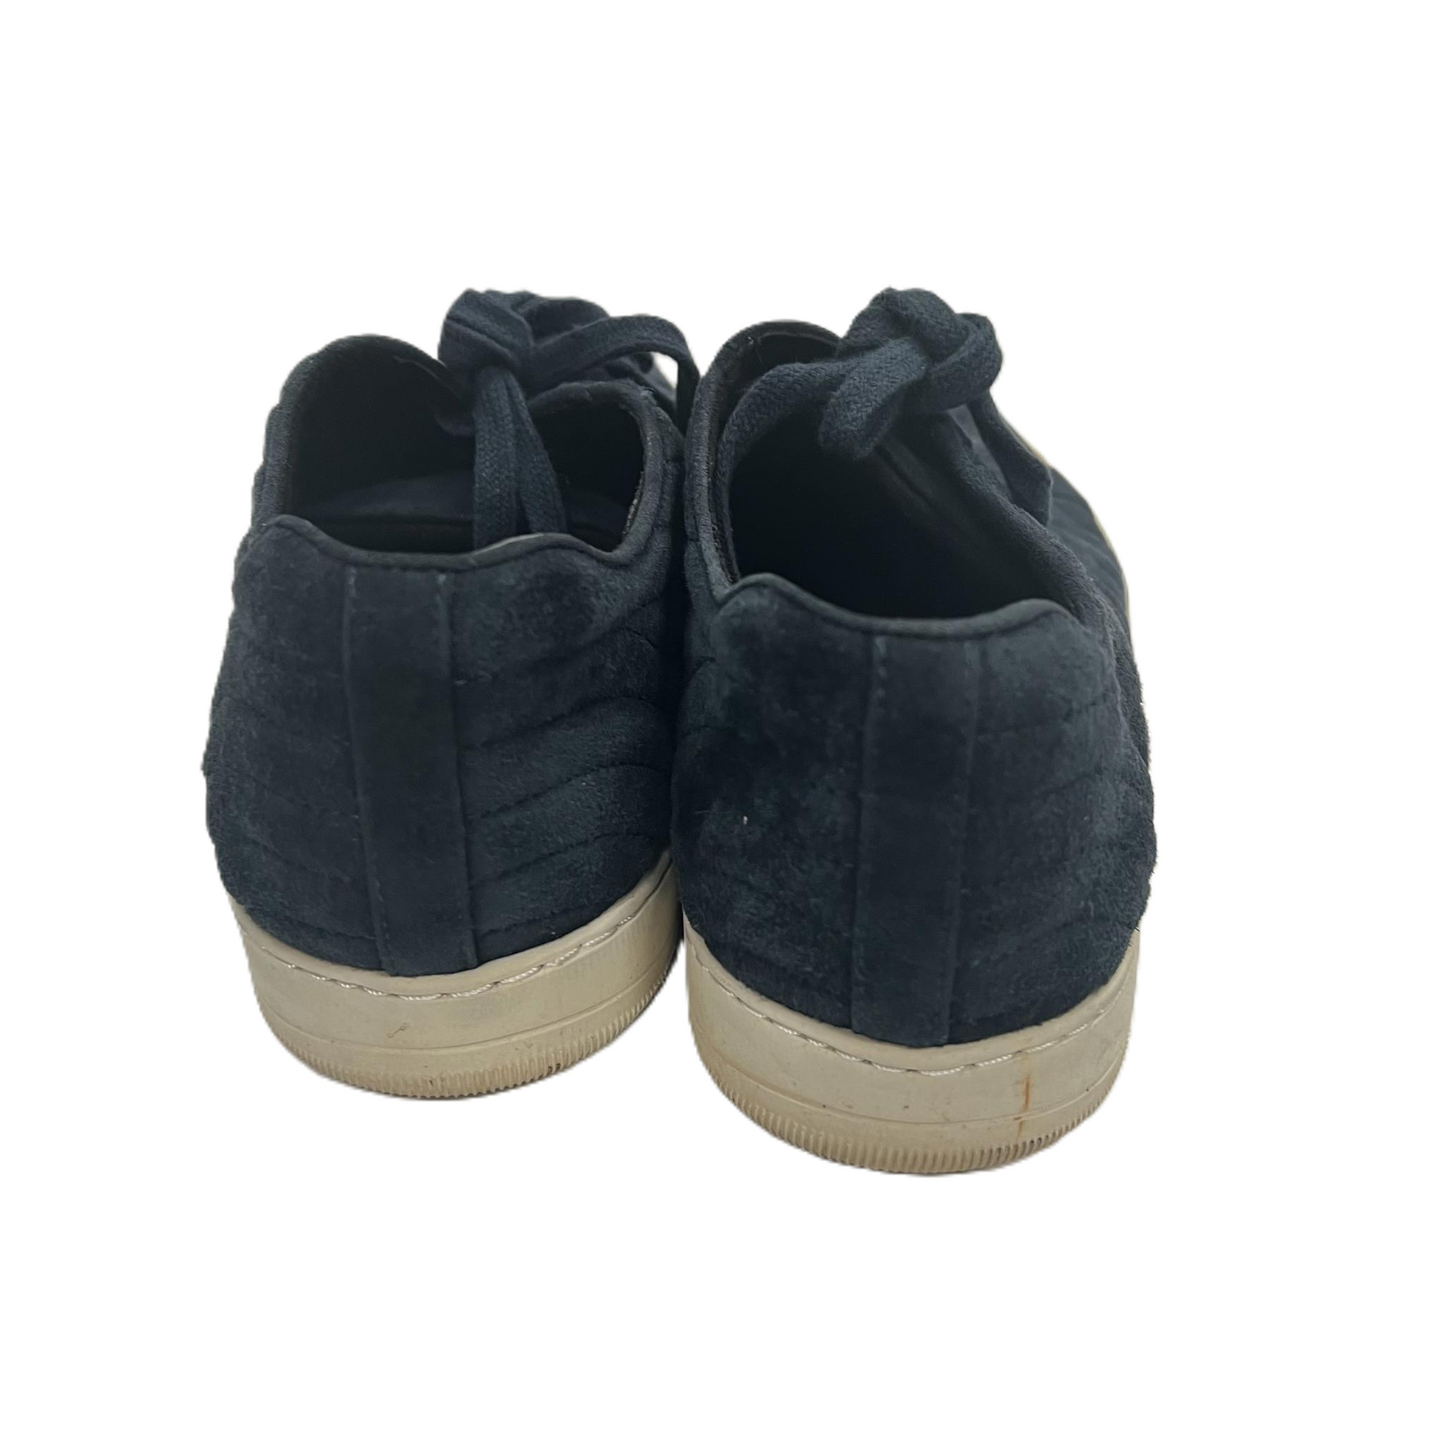 Shoes Sneakers By Vaneli  Size: 8.5